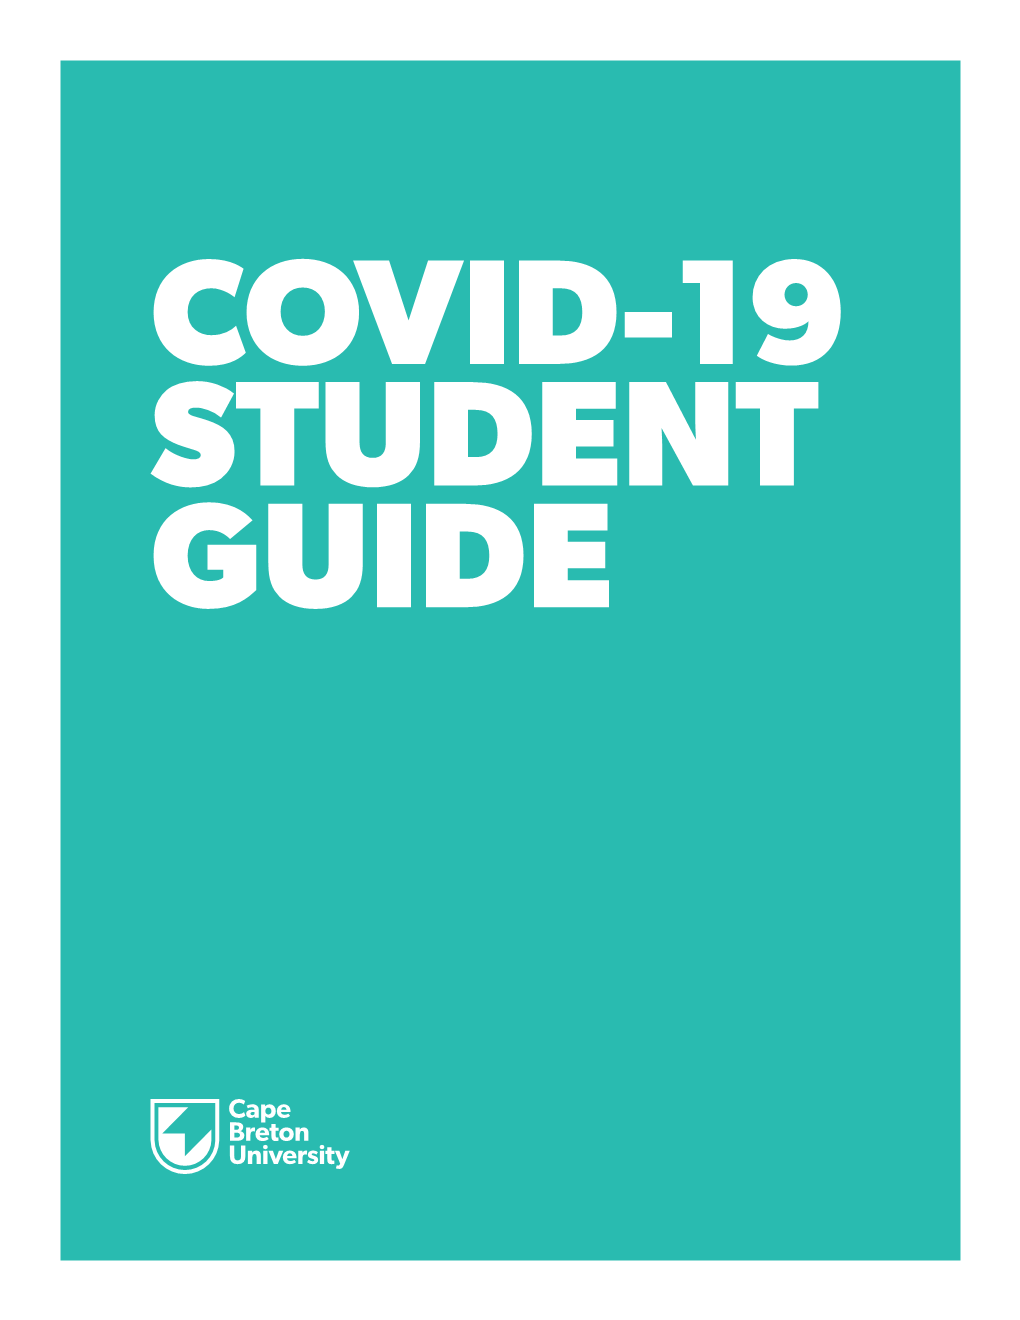 COVID-19 STUDENT GUIDE the Nova Scotia Government Has Implemented Many Measures in Response to the Coronavirus Pandemic